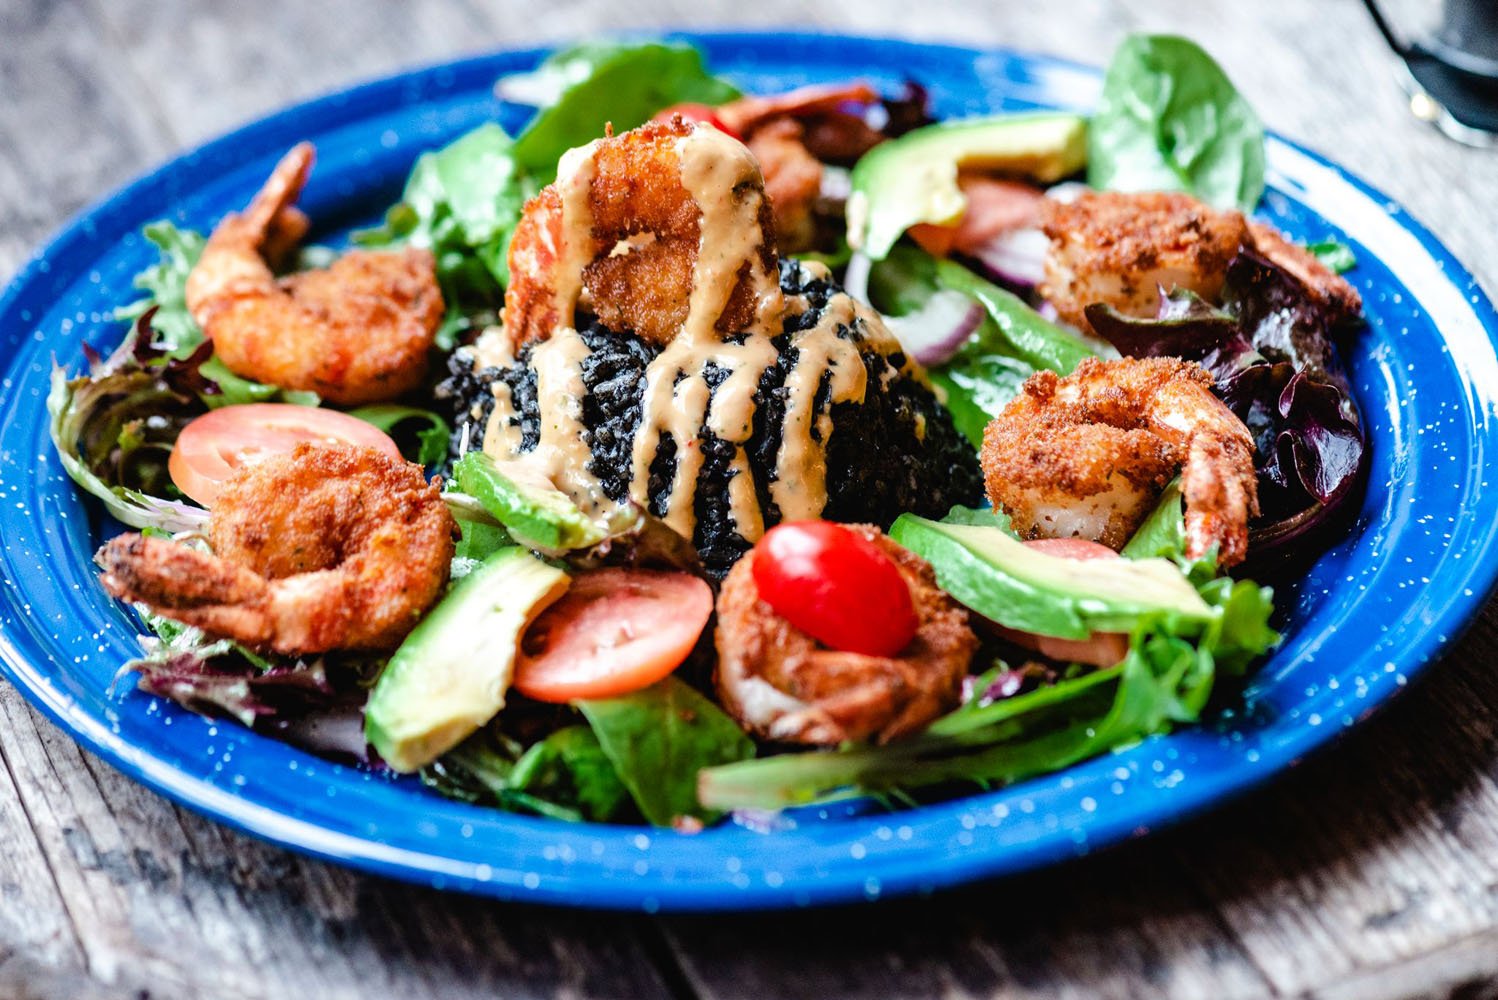 A vibrant shrimp salad with avocado, tomatoes, mixed greens, and a drizzle of creamy dressing, served on a blue-rimmed plate on a wooden table.